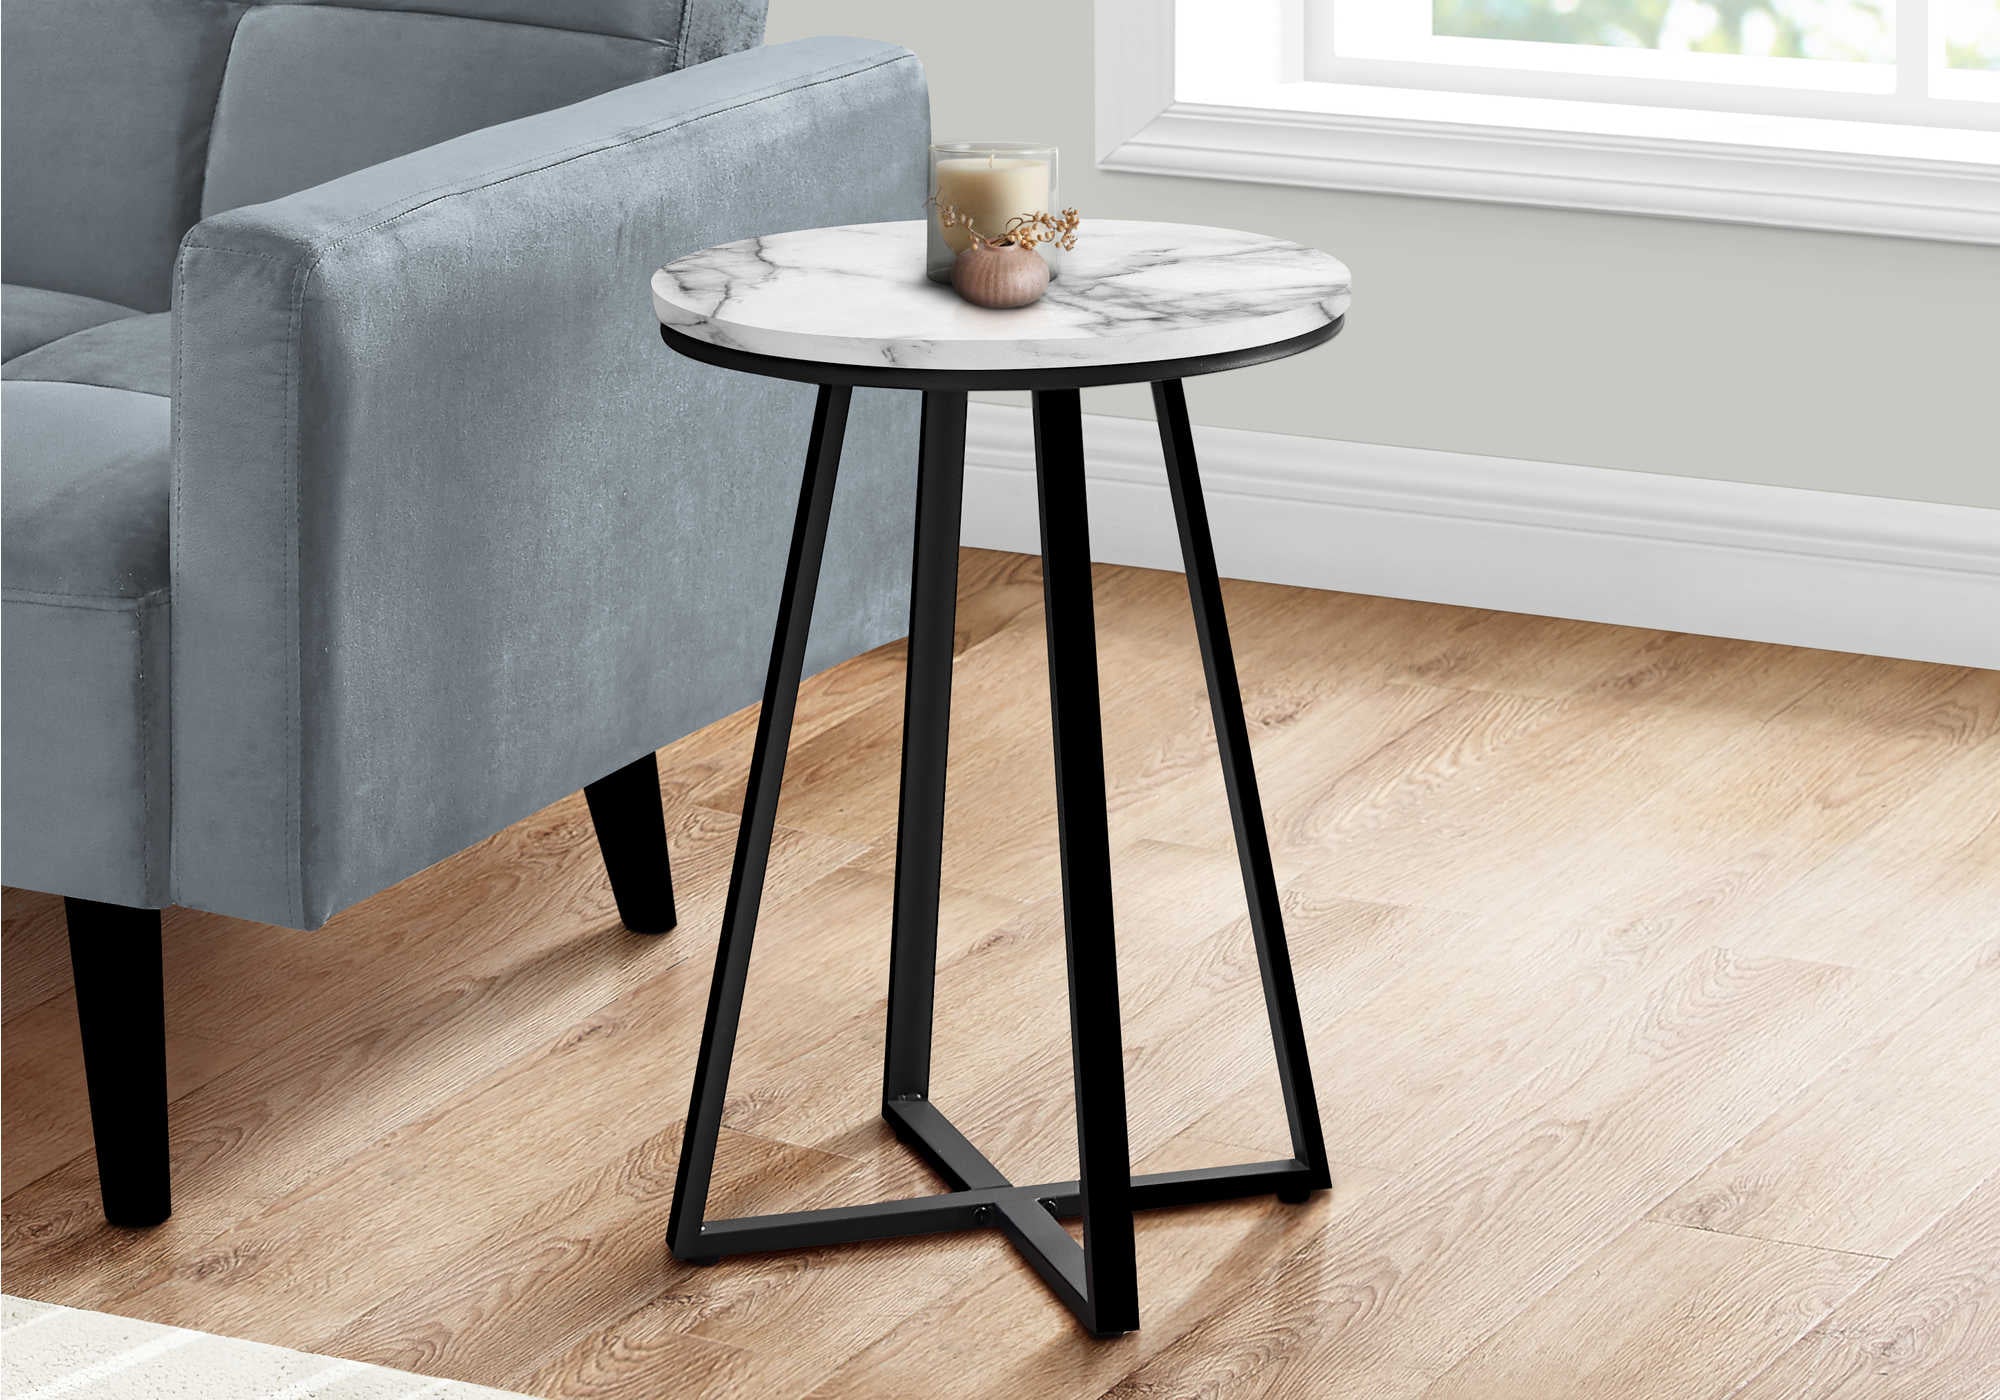 I 2178 - ACCENT TABLE - 22"H / WHITE MARBLE / BLACK METAL BY MONARCH SPECIALTIES INC